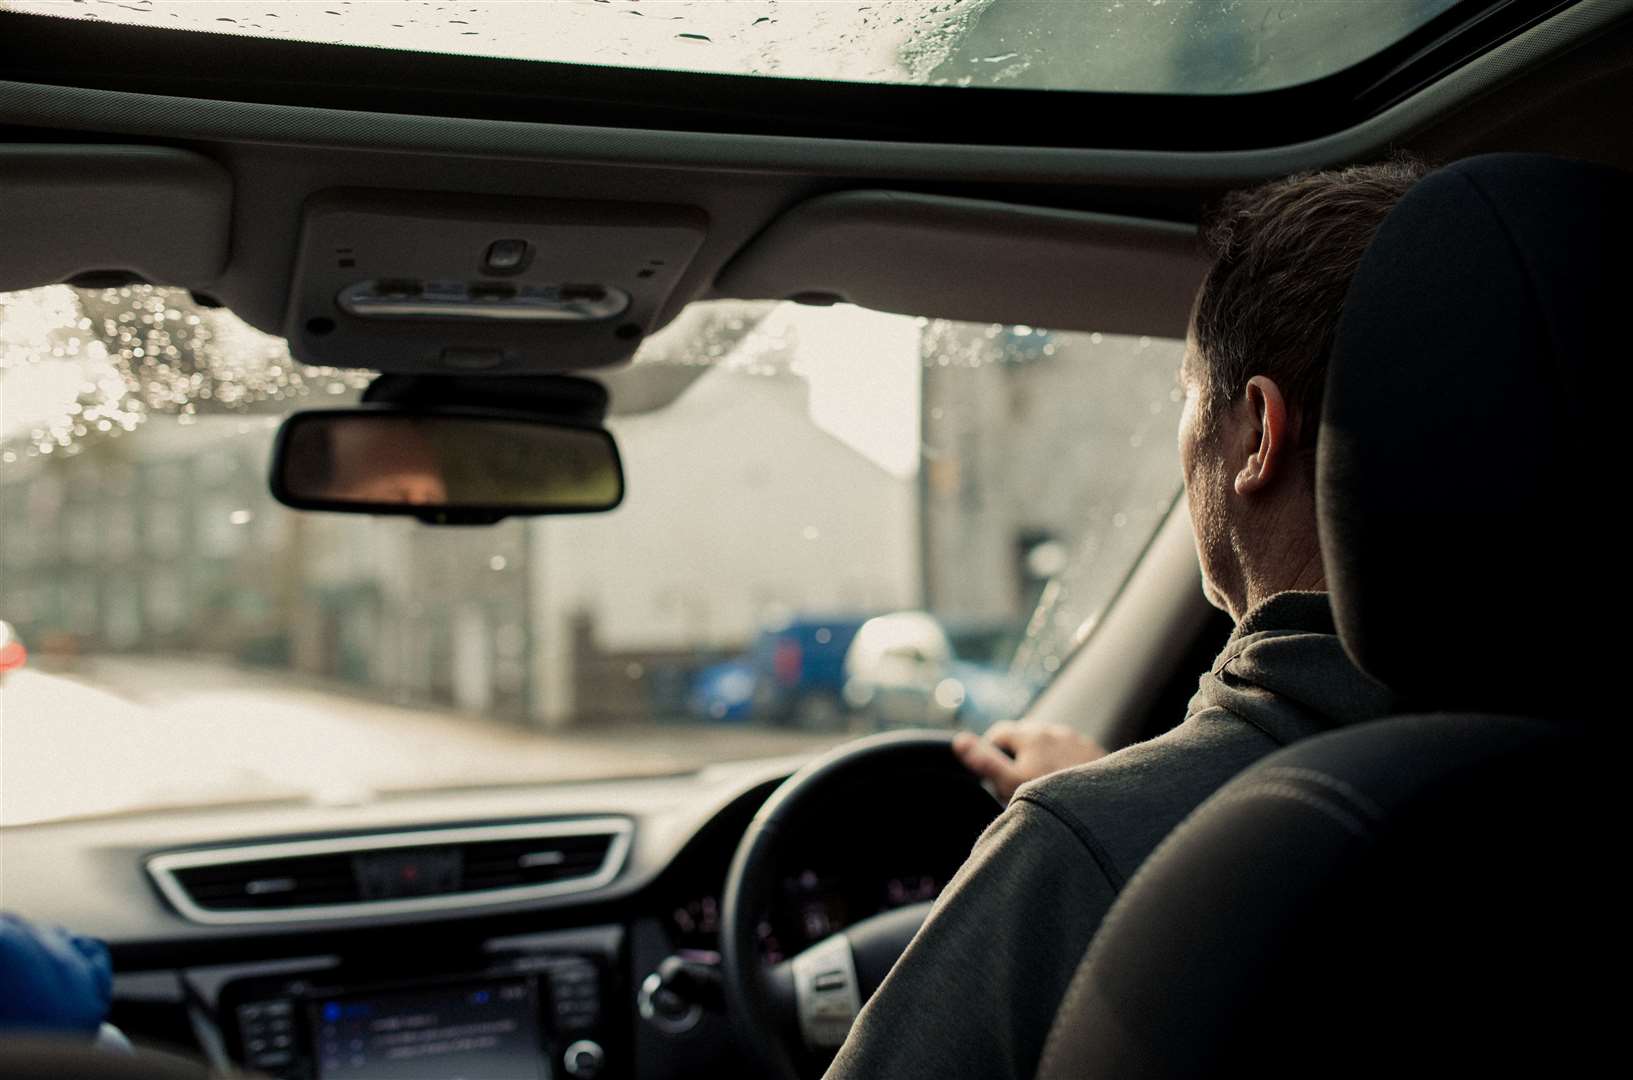 Car drivers could be in for a ‘shock’ fears the comparison site. Image: iStock.